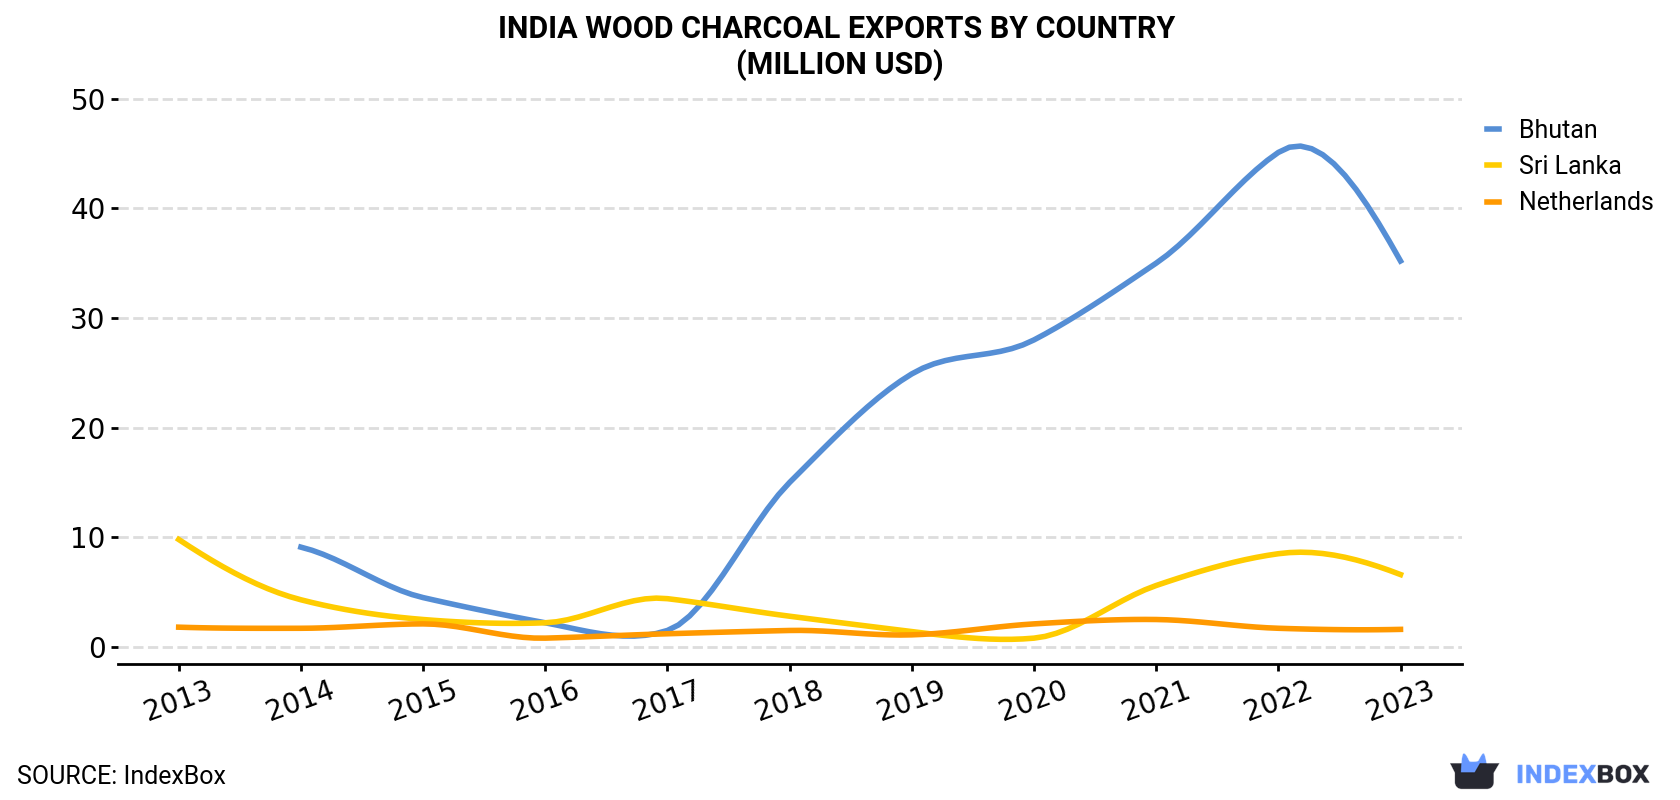 India Wood Charcoal Exports By Country (Million USD)